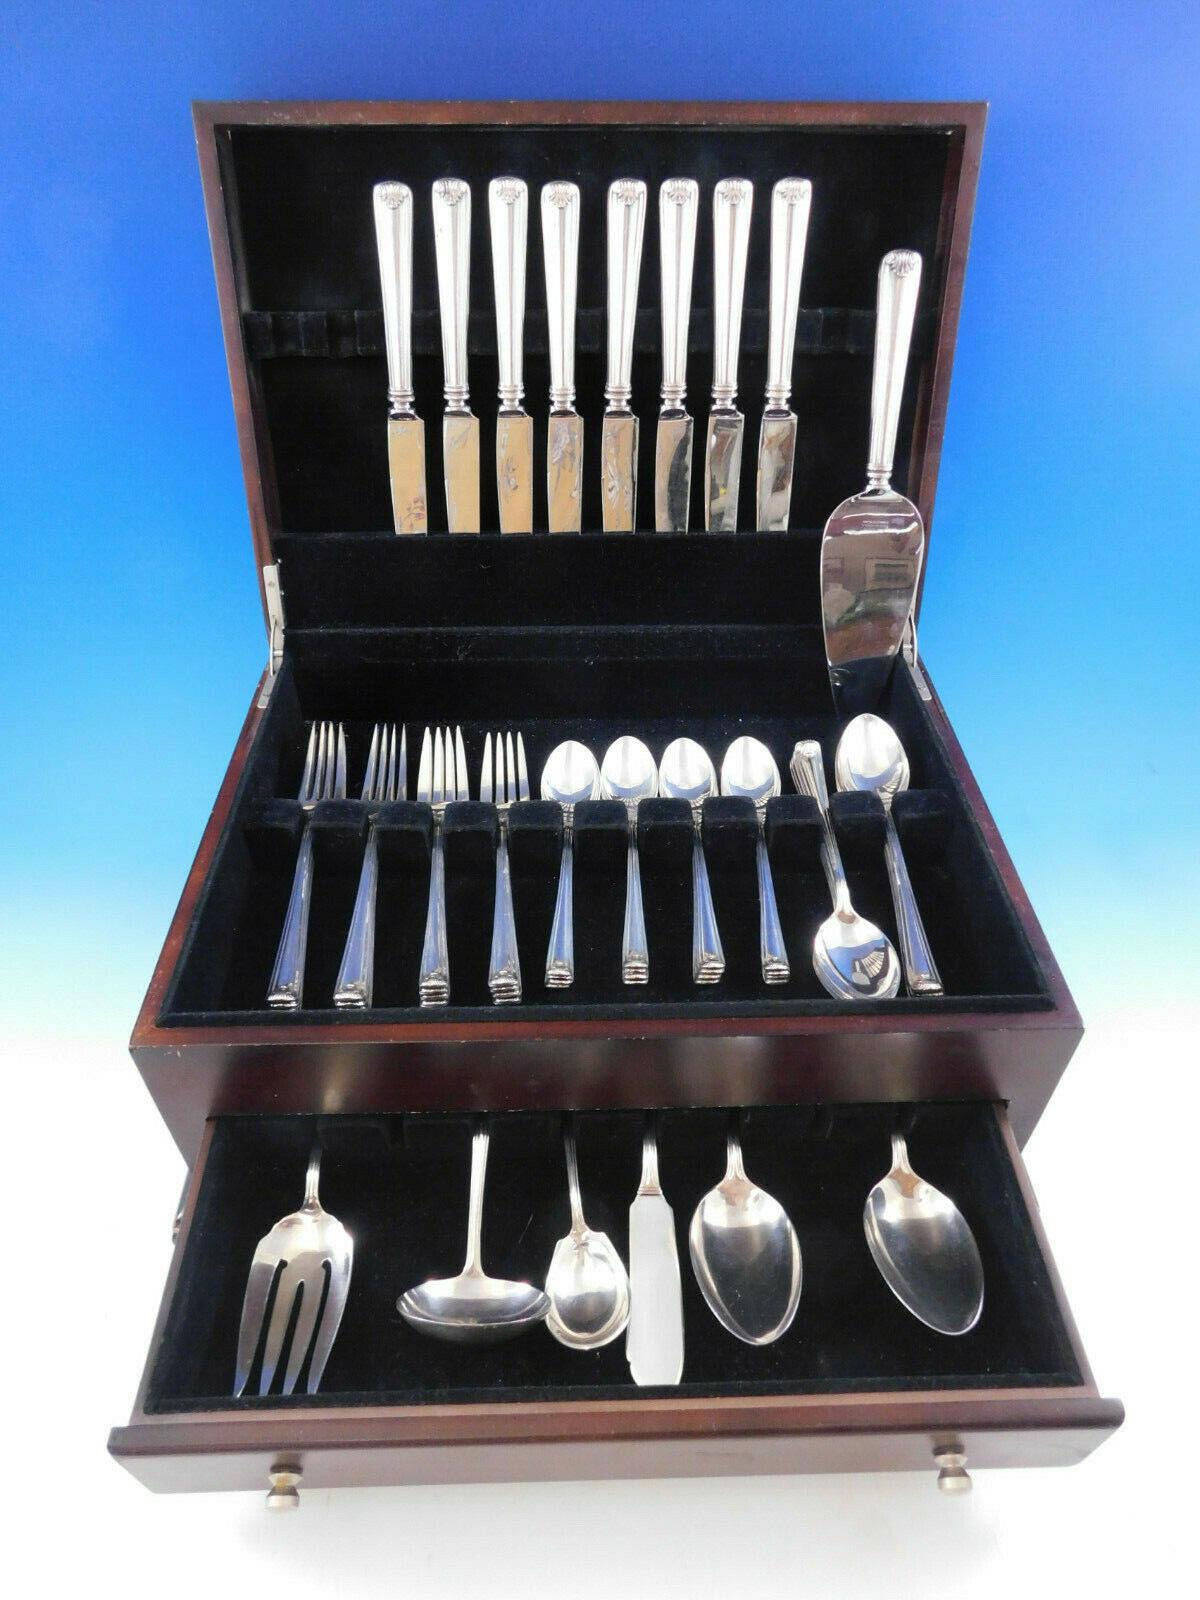 Scarce Windsor Manor by Watson, circa 1940, sterling silver flatware set - 55 pieces. This set includes:

8 knives, 9 1/4